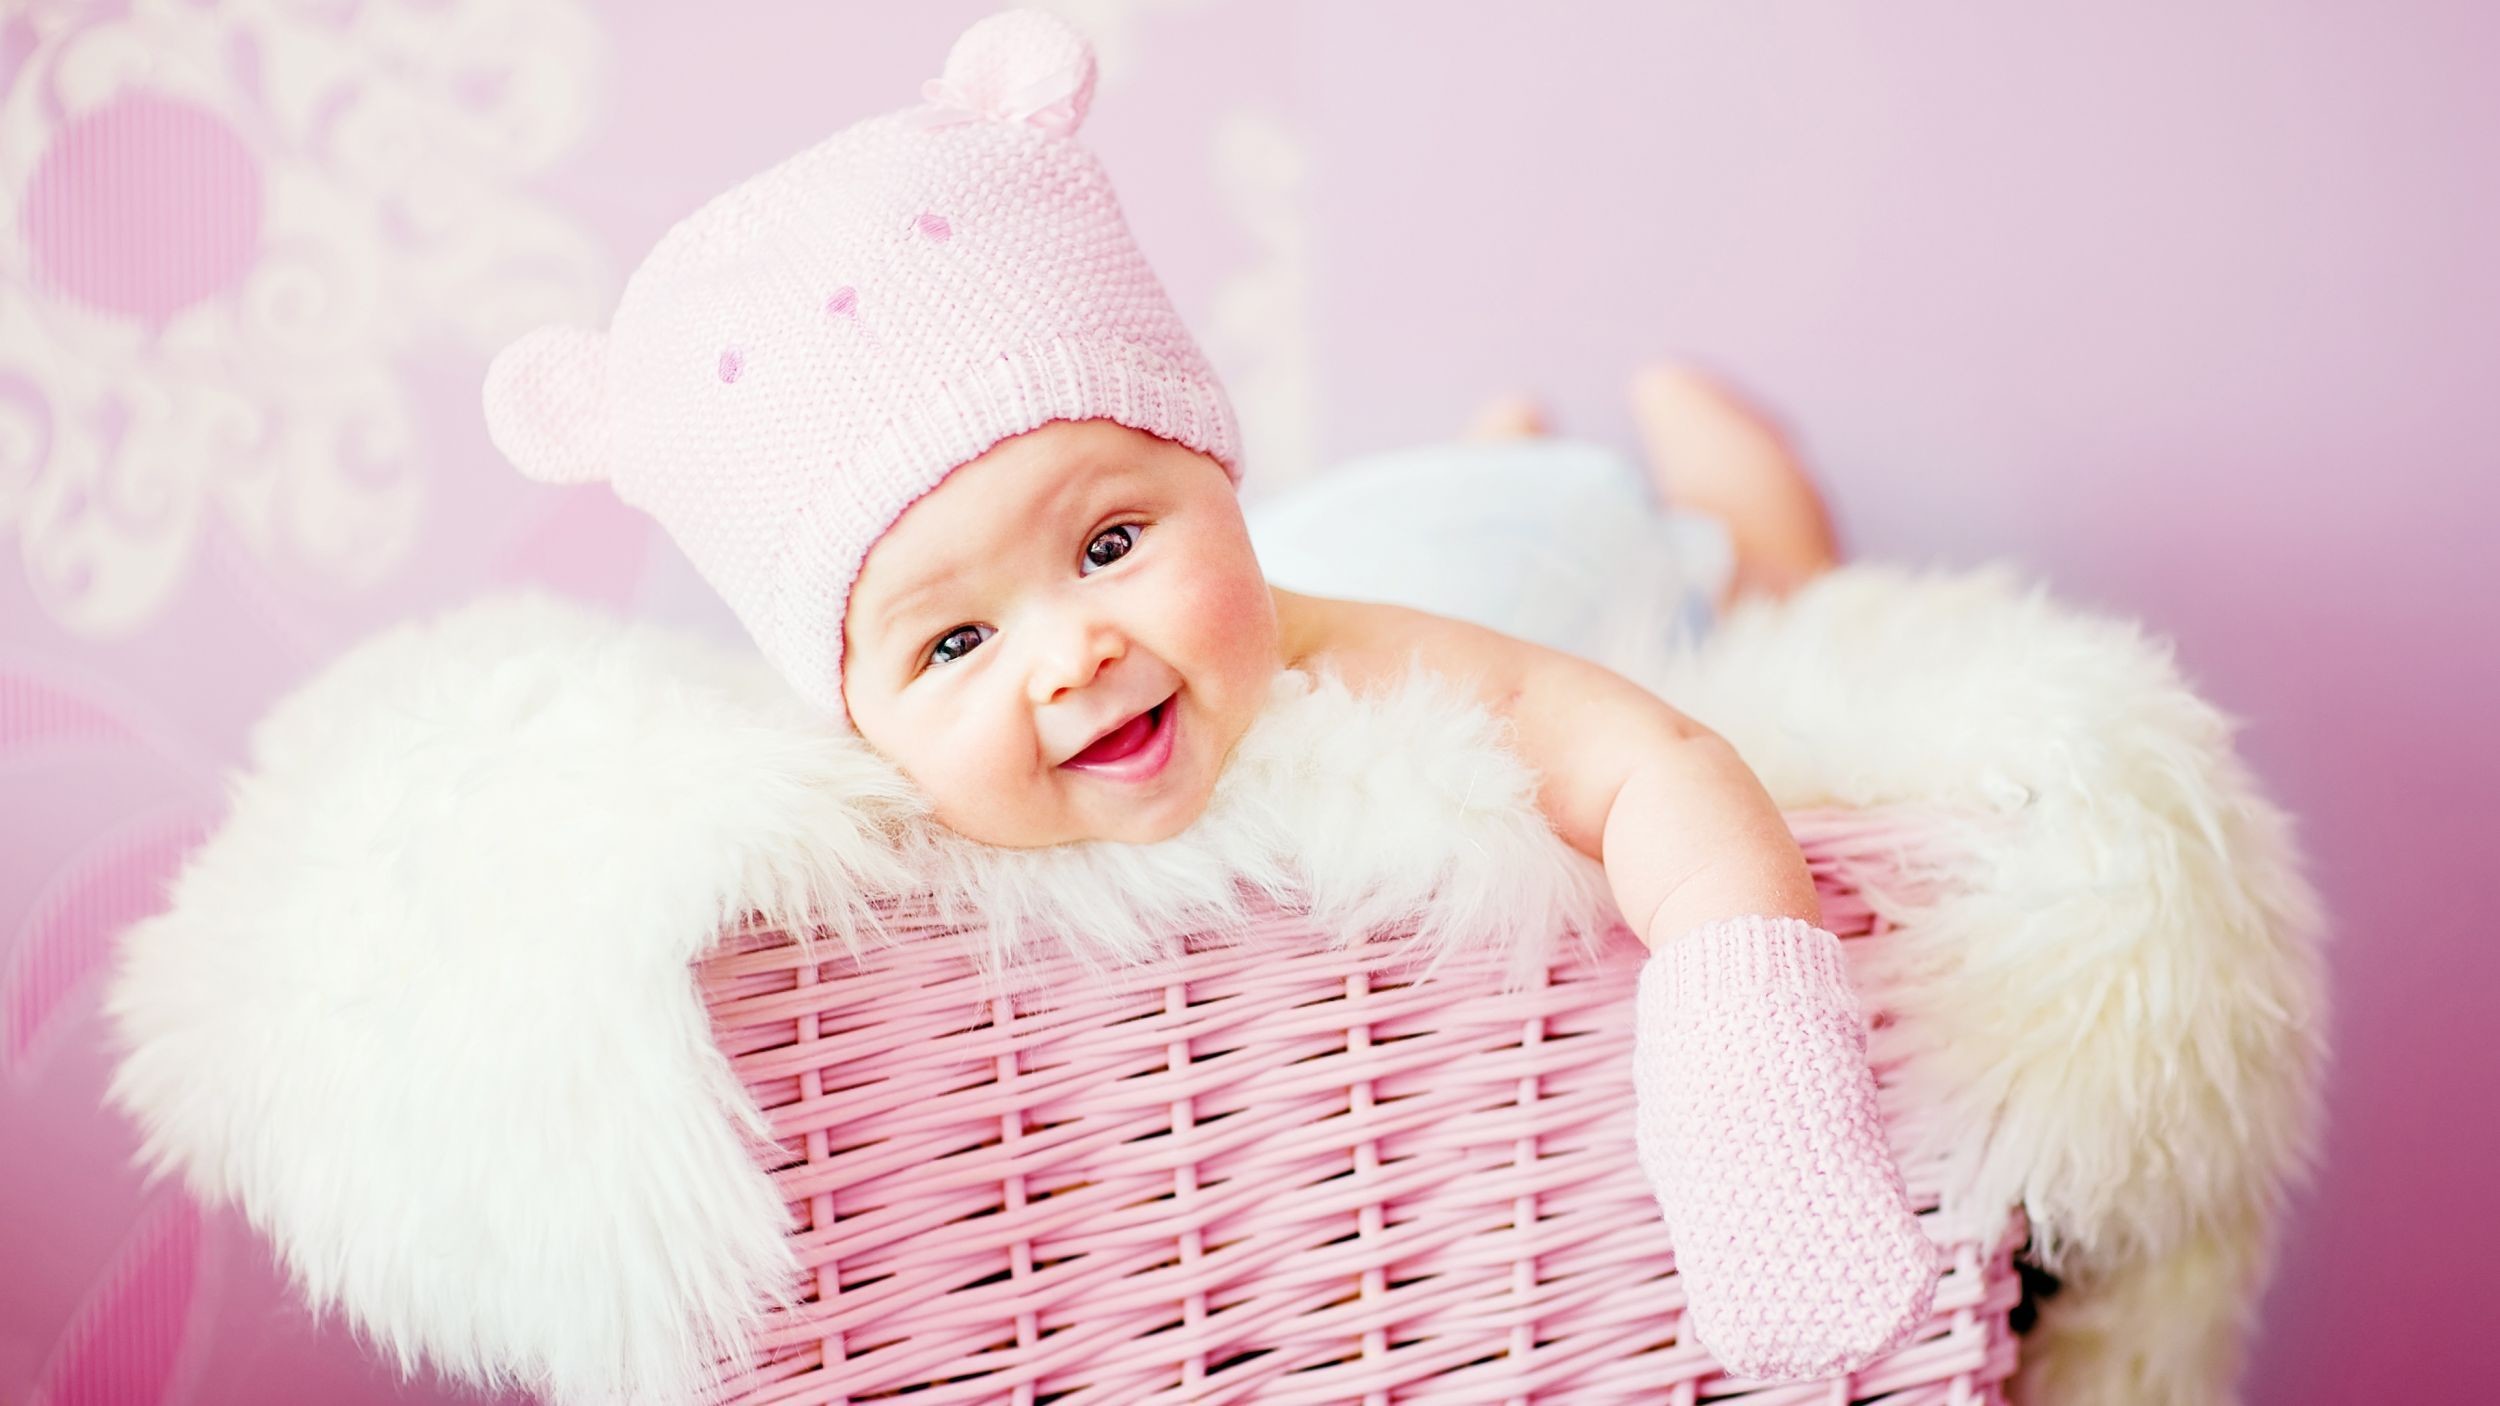 2500x1406 Cute Baby Backgrounds, 09.17.15 1.21 Mb for mobile and desktop